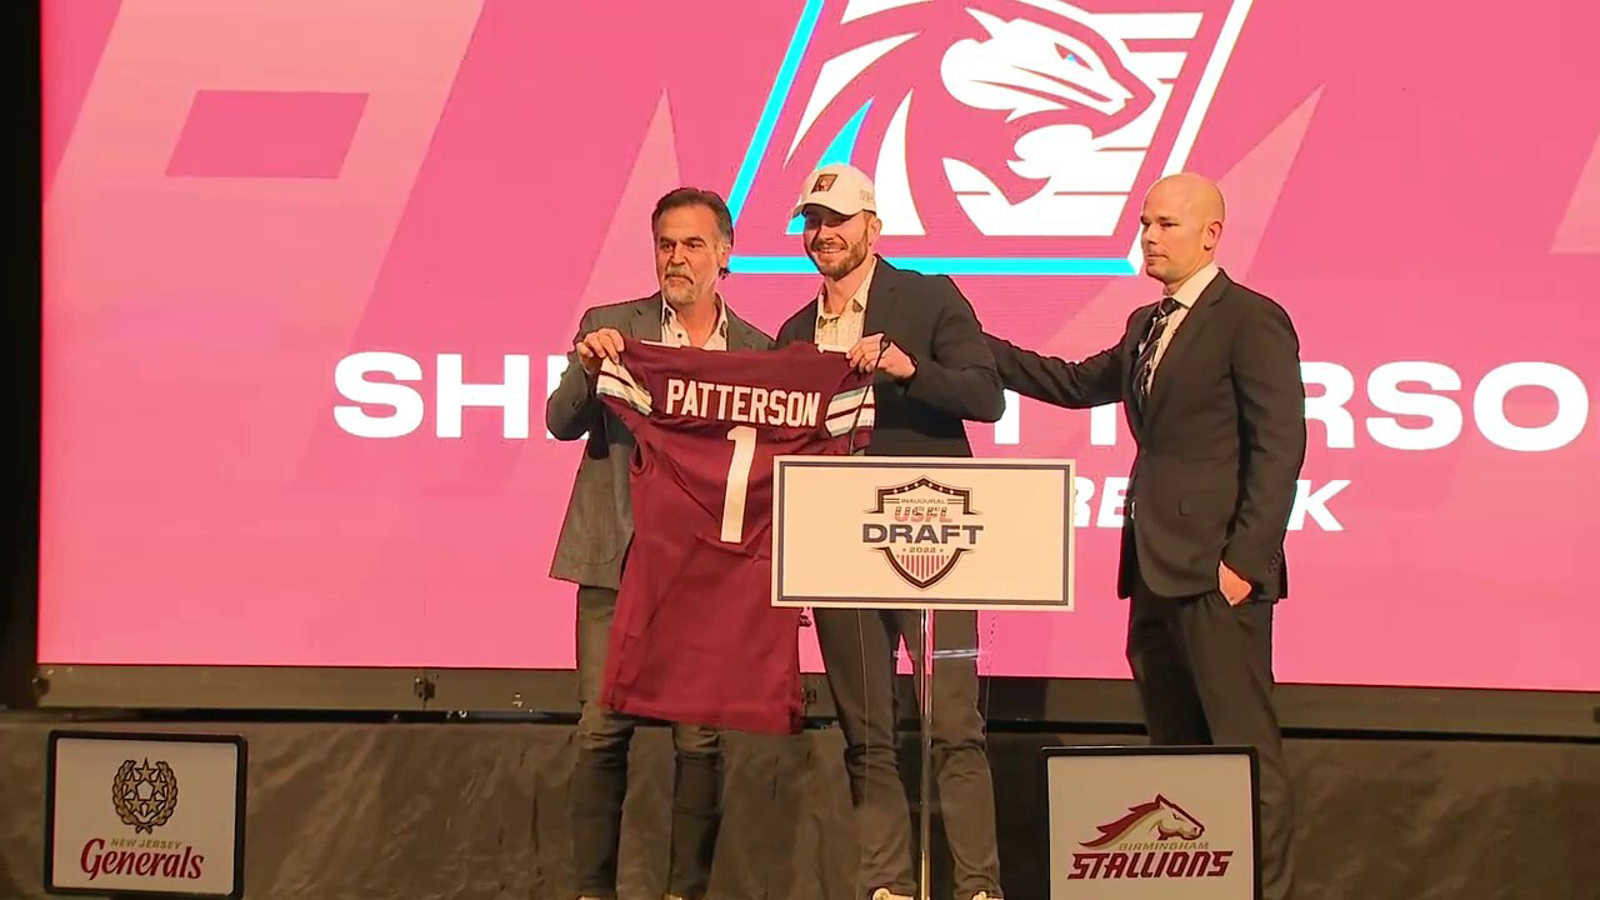 Brad Keselowski announces Michigan Panthers' Shea Patterson as first overall pick in USFL Draft